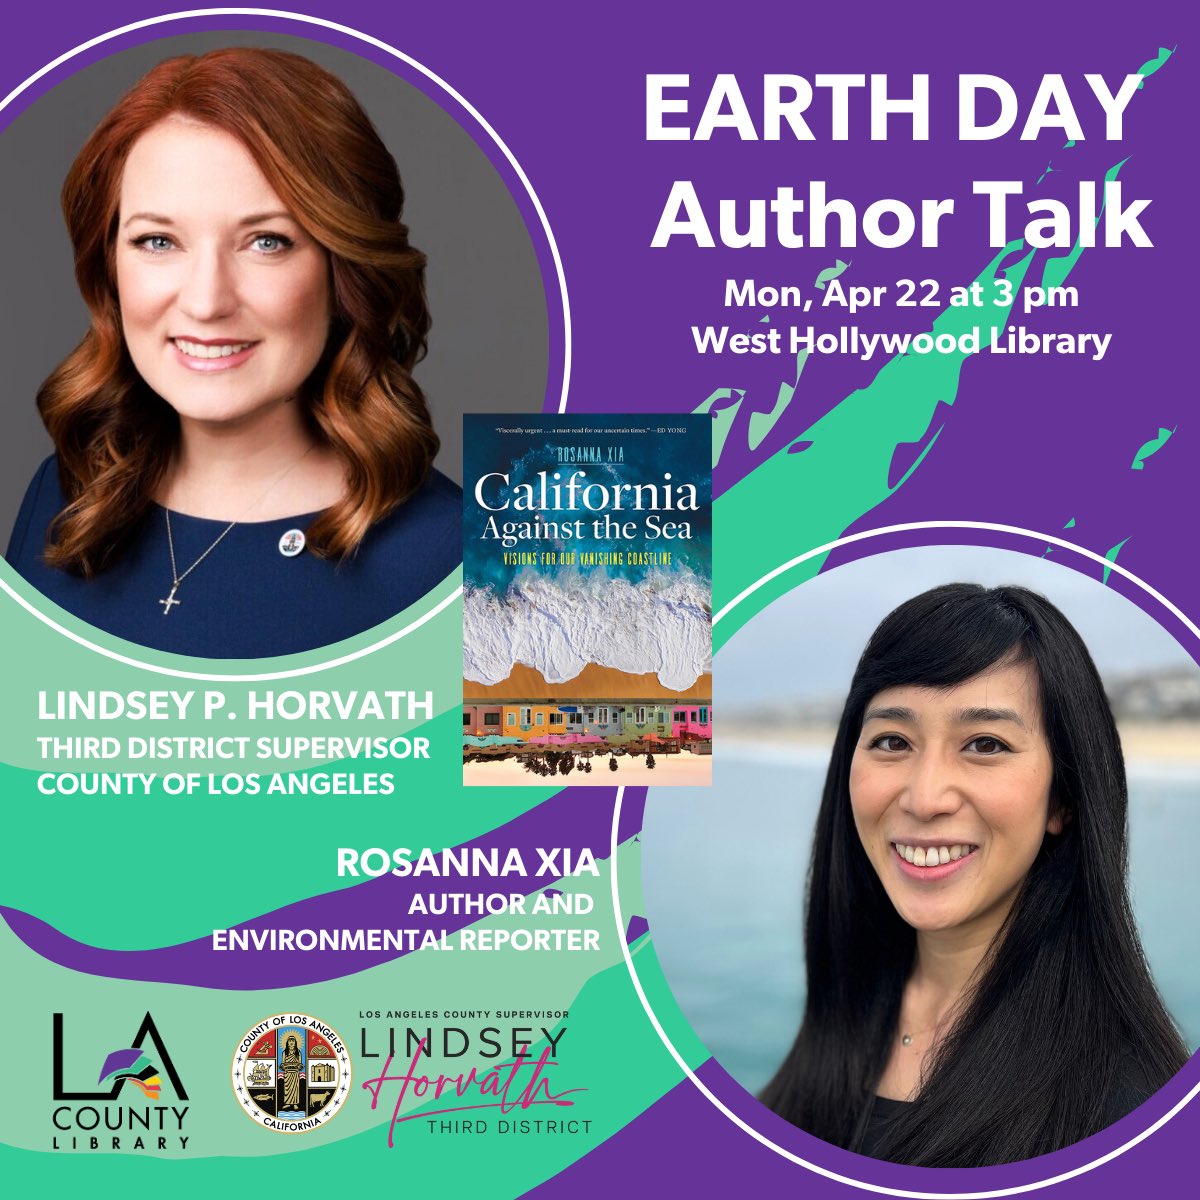 Happy Earth Day! I’ll be at the @WeHoLibrary today for an @LACountyLibrary book talk with @LindseyPHorvath 🌏🌊✨ Join us at 3pm! Details below, looking forward to seeing everyone! visit.lacountylibrary.org/event/10565489